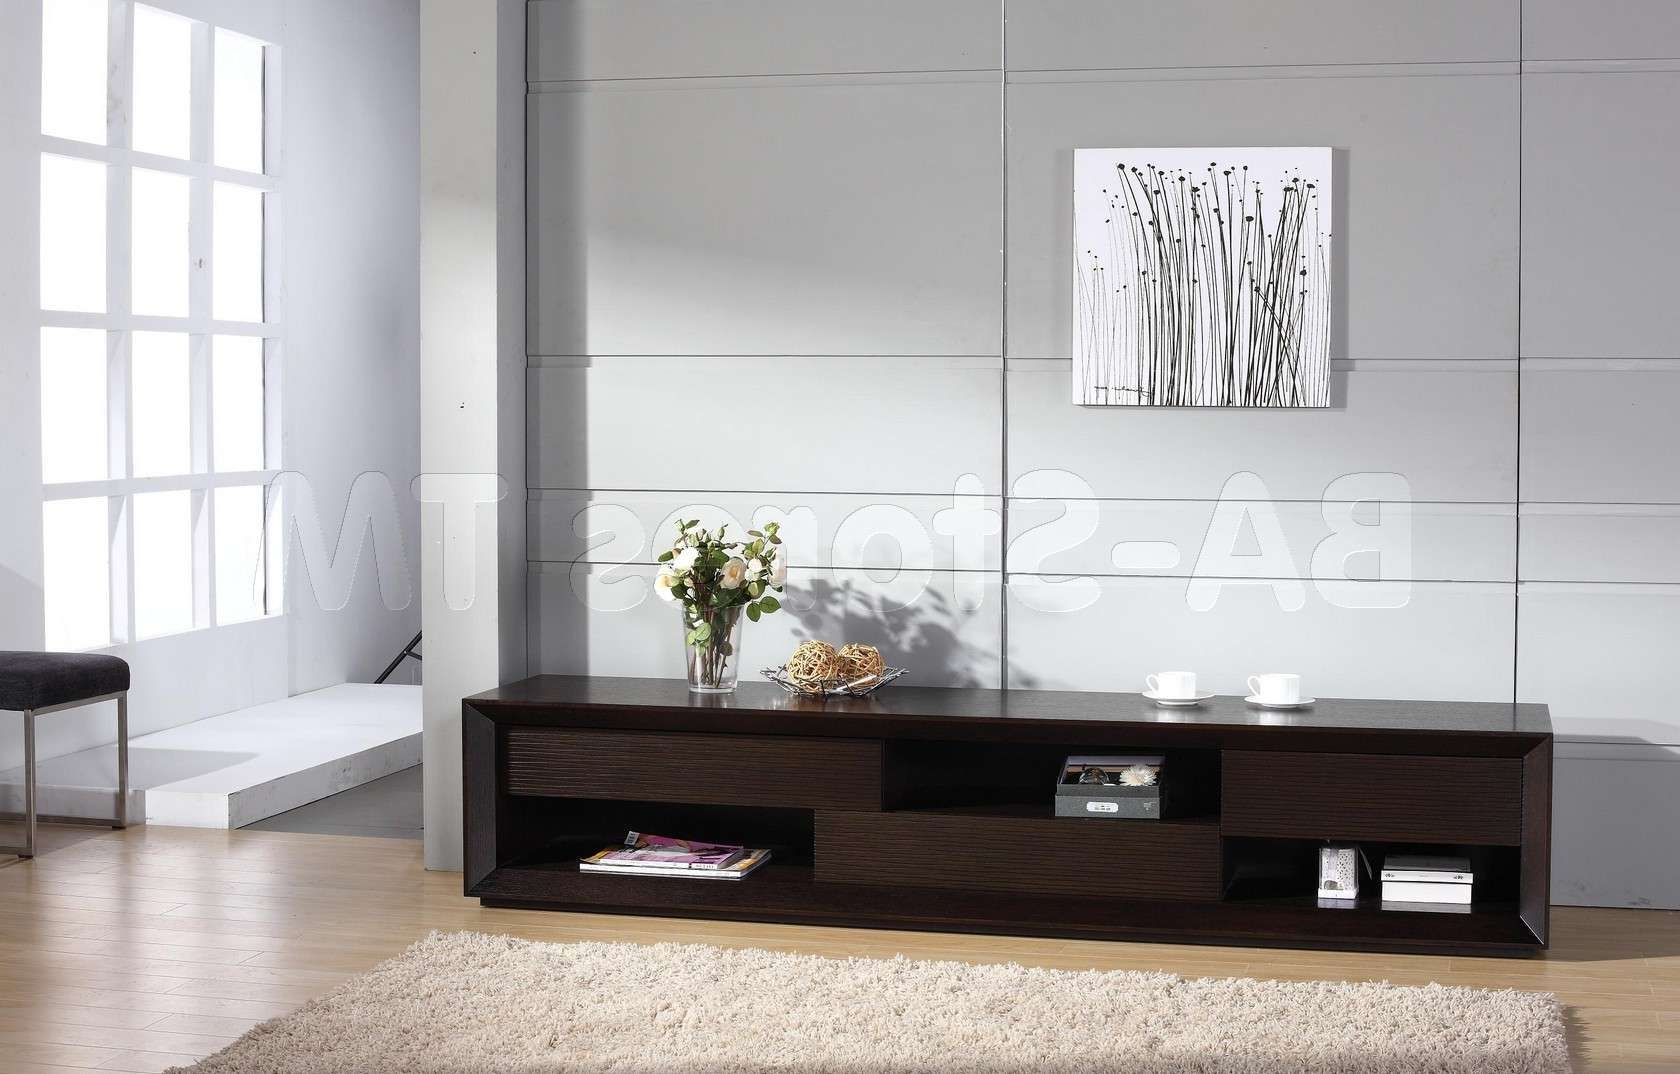 Assym Tv Stand – $898.00 : Furniture Store Shipped Free In Usa, Nyc With Regard To Ultra Modern Tv Stands (Gallery 2 of 15)